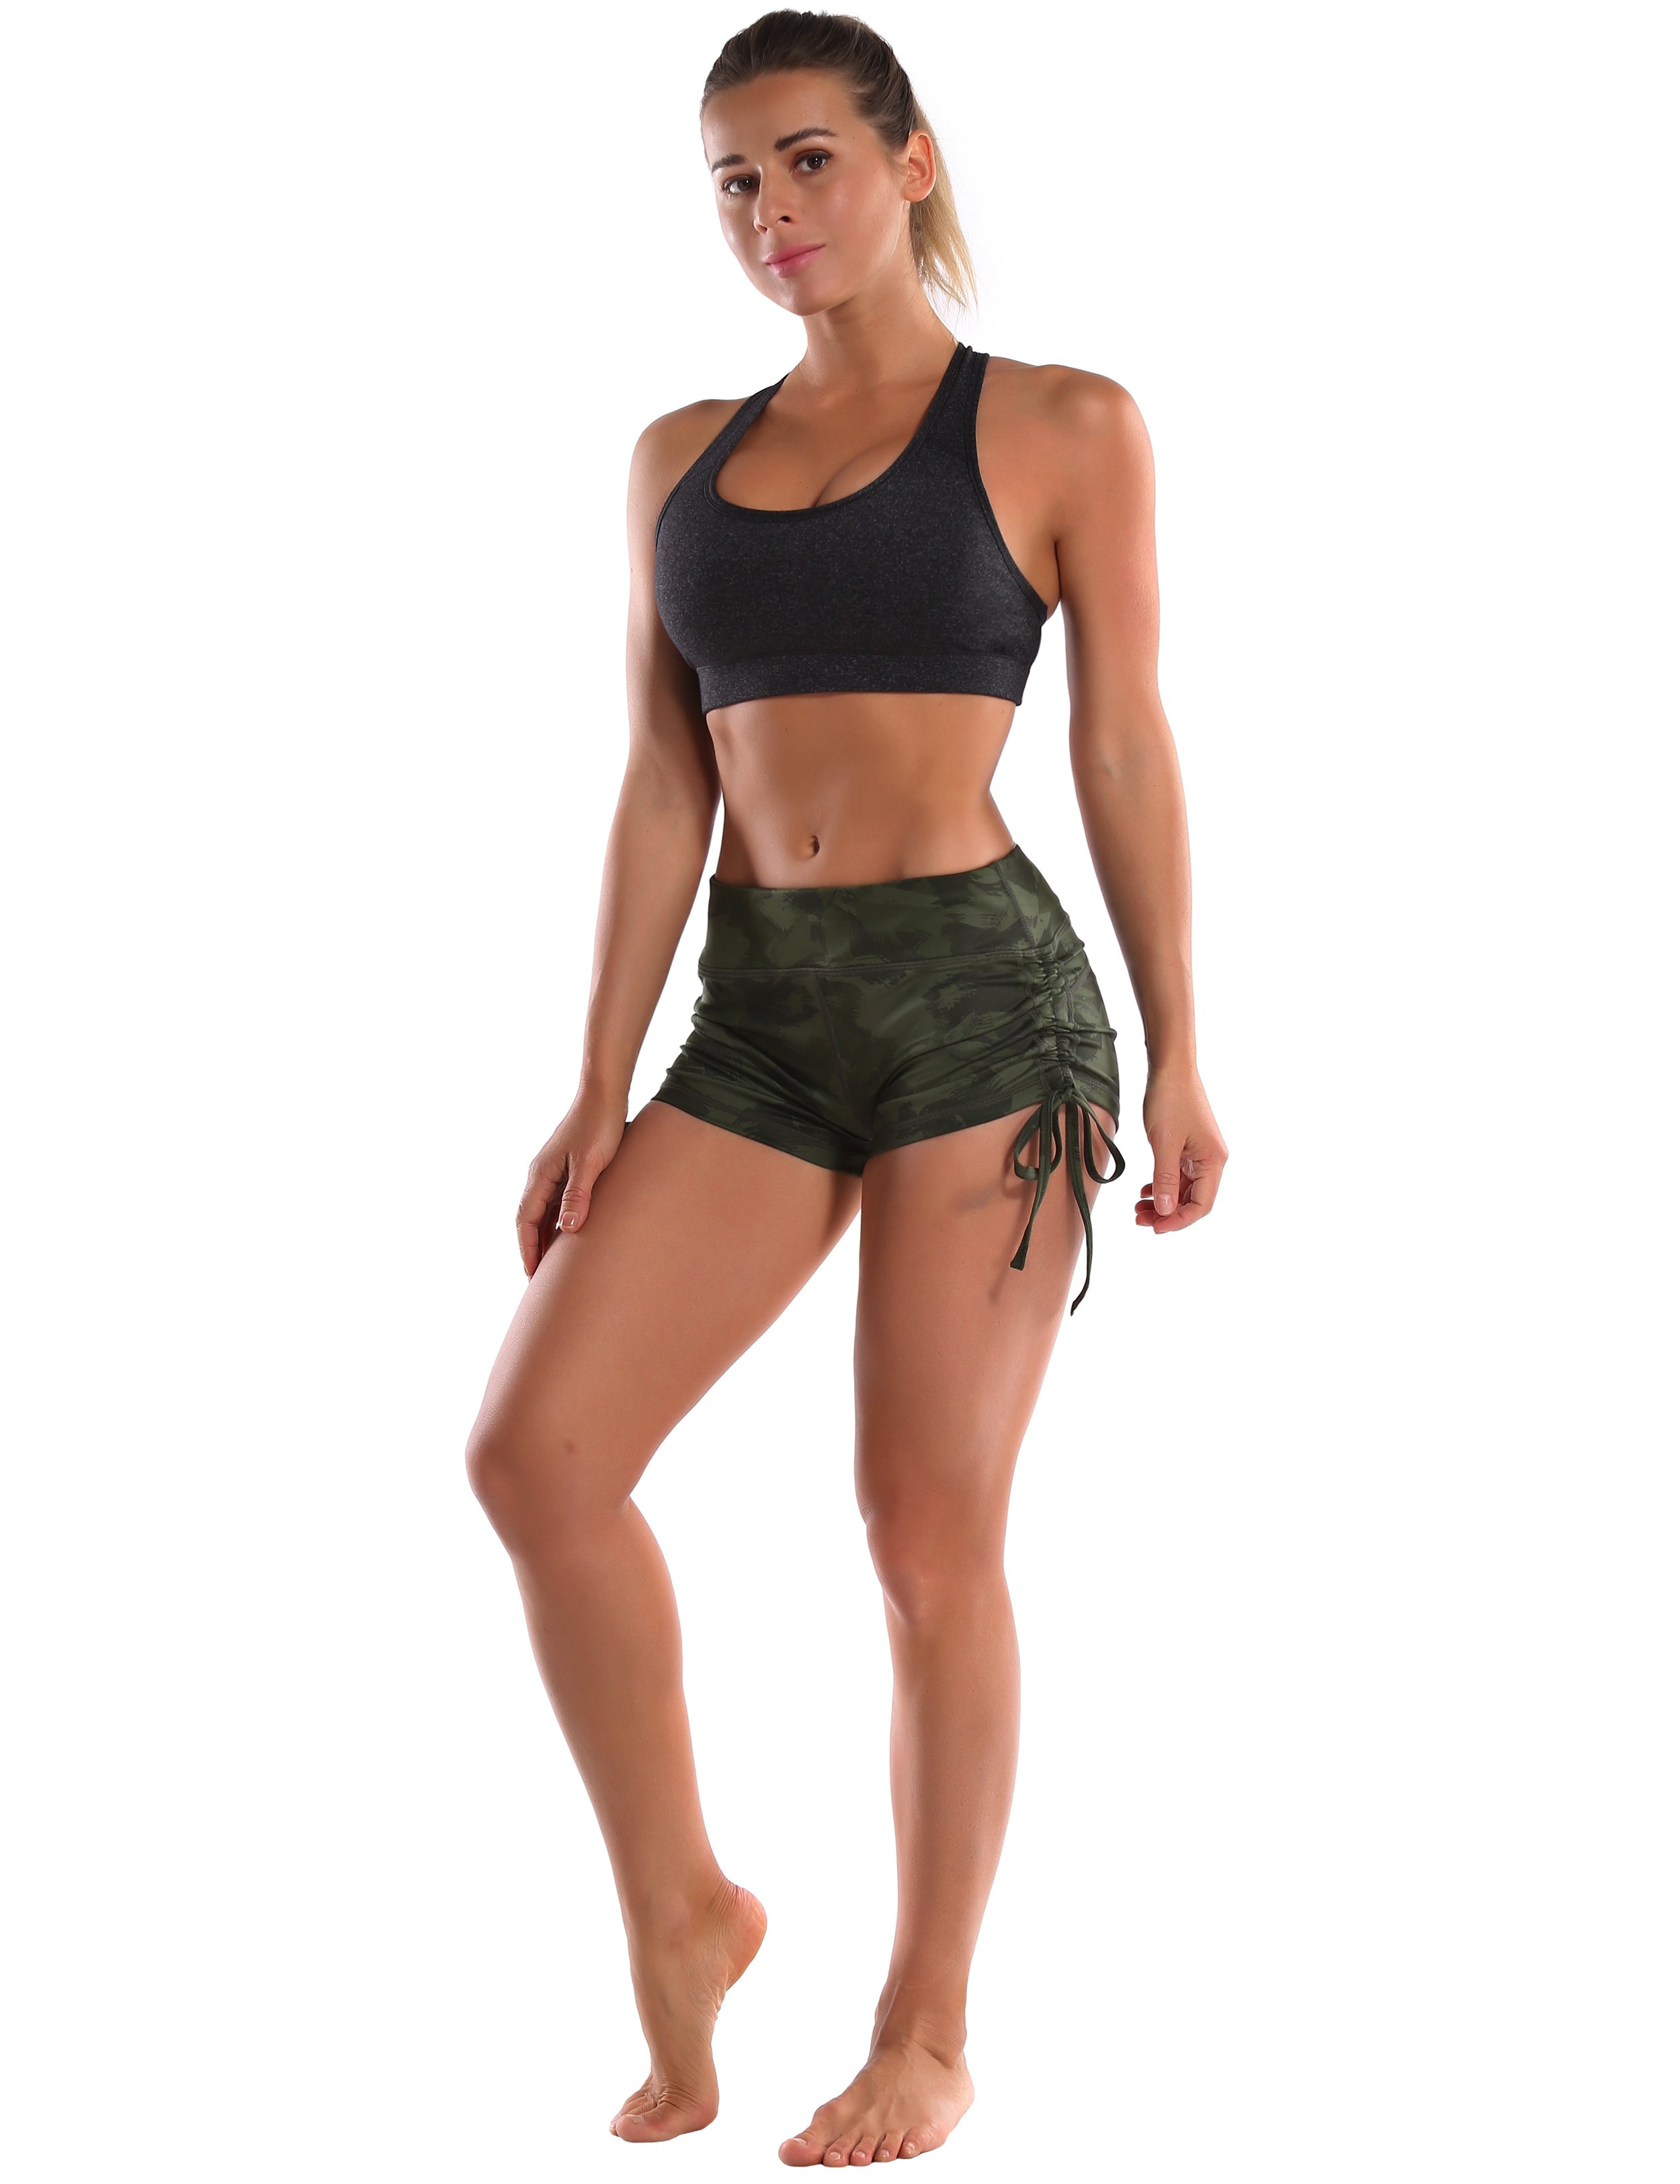 Printed Side Drawstring Hot Shorts green brushcamo Sleek, soft, smooth and totally comfortable: our newest sexy style is here. Softest-ever fabric High elasticity High density 4-way stretch Fabric doesn't attract lint easily No see-through Moisture-wicking Machine wash 78% Polyester, 22% Spandex